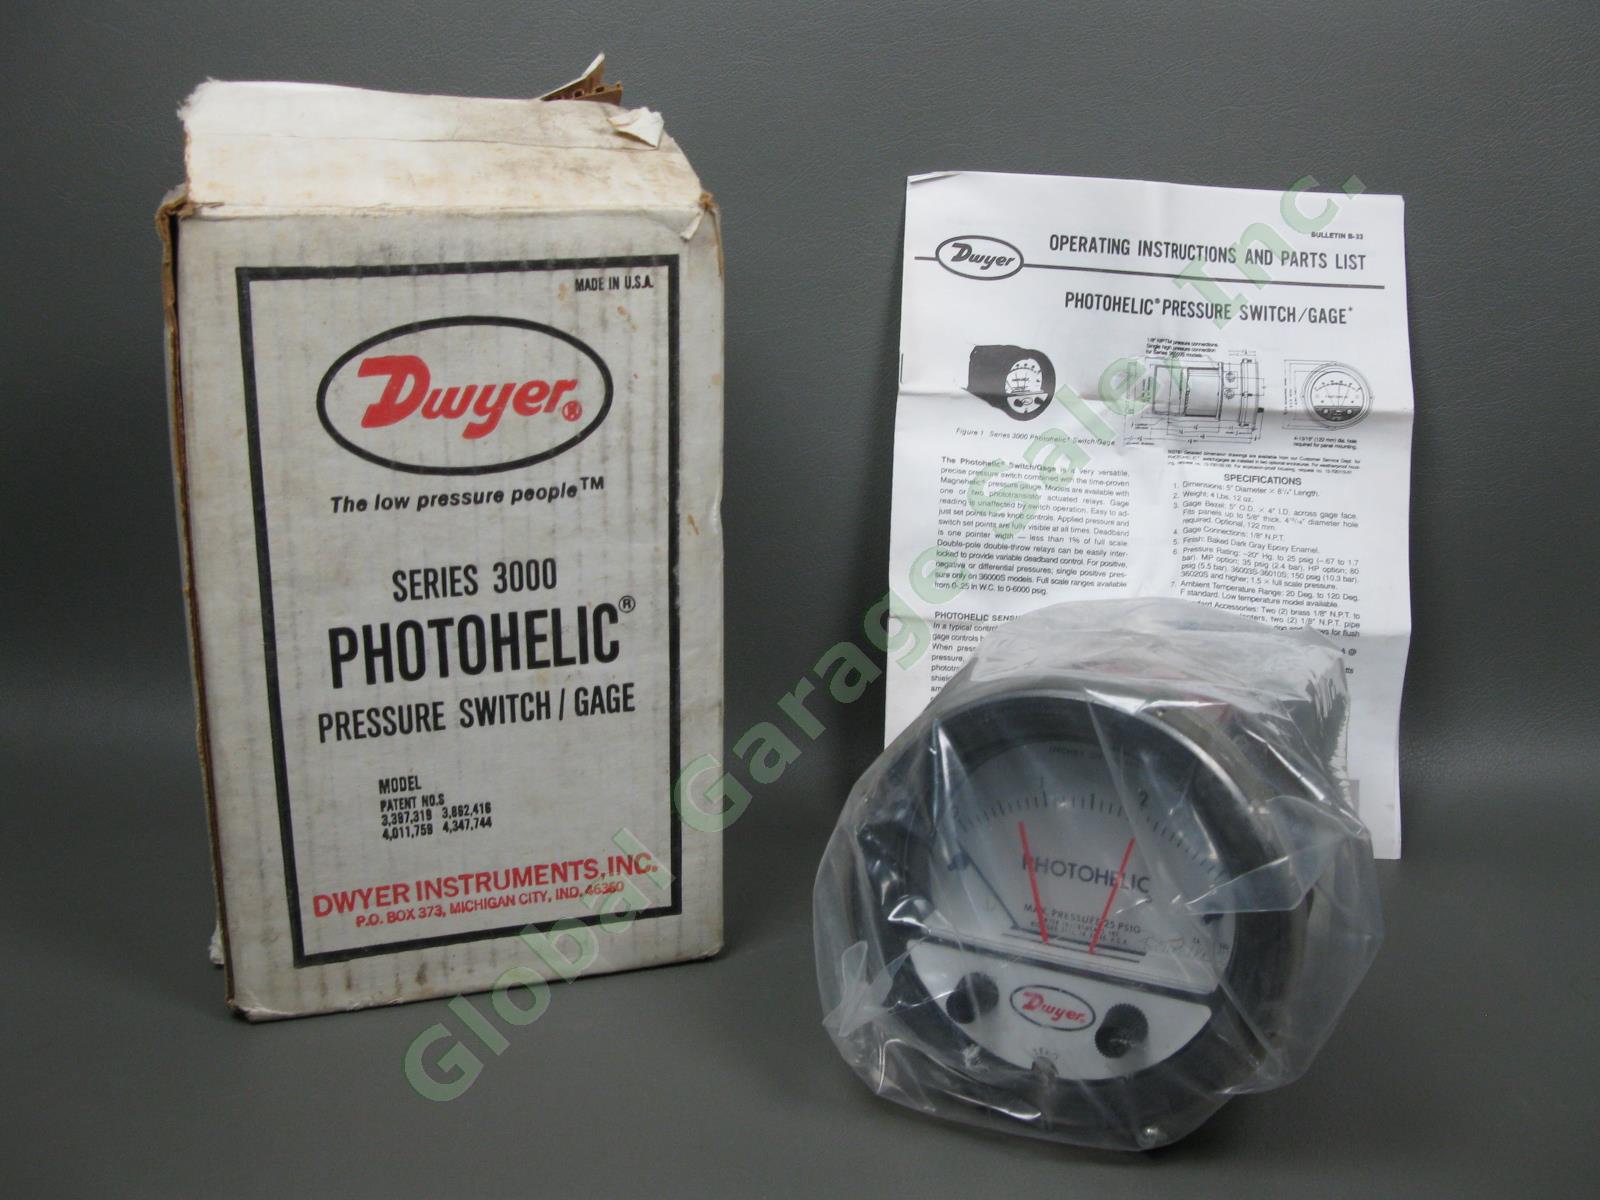 NEW Dwyer Photohelic Series 3000 3003 Pressure Switch Gage 25 PSIG 0-3" Water